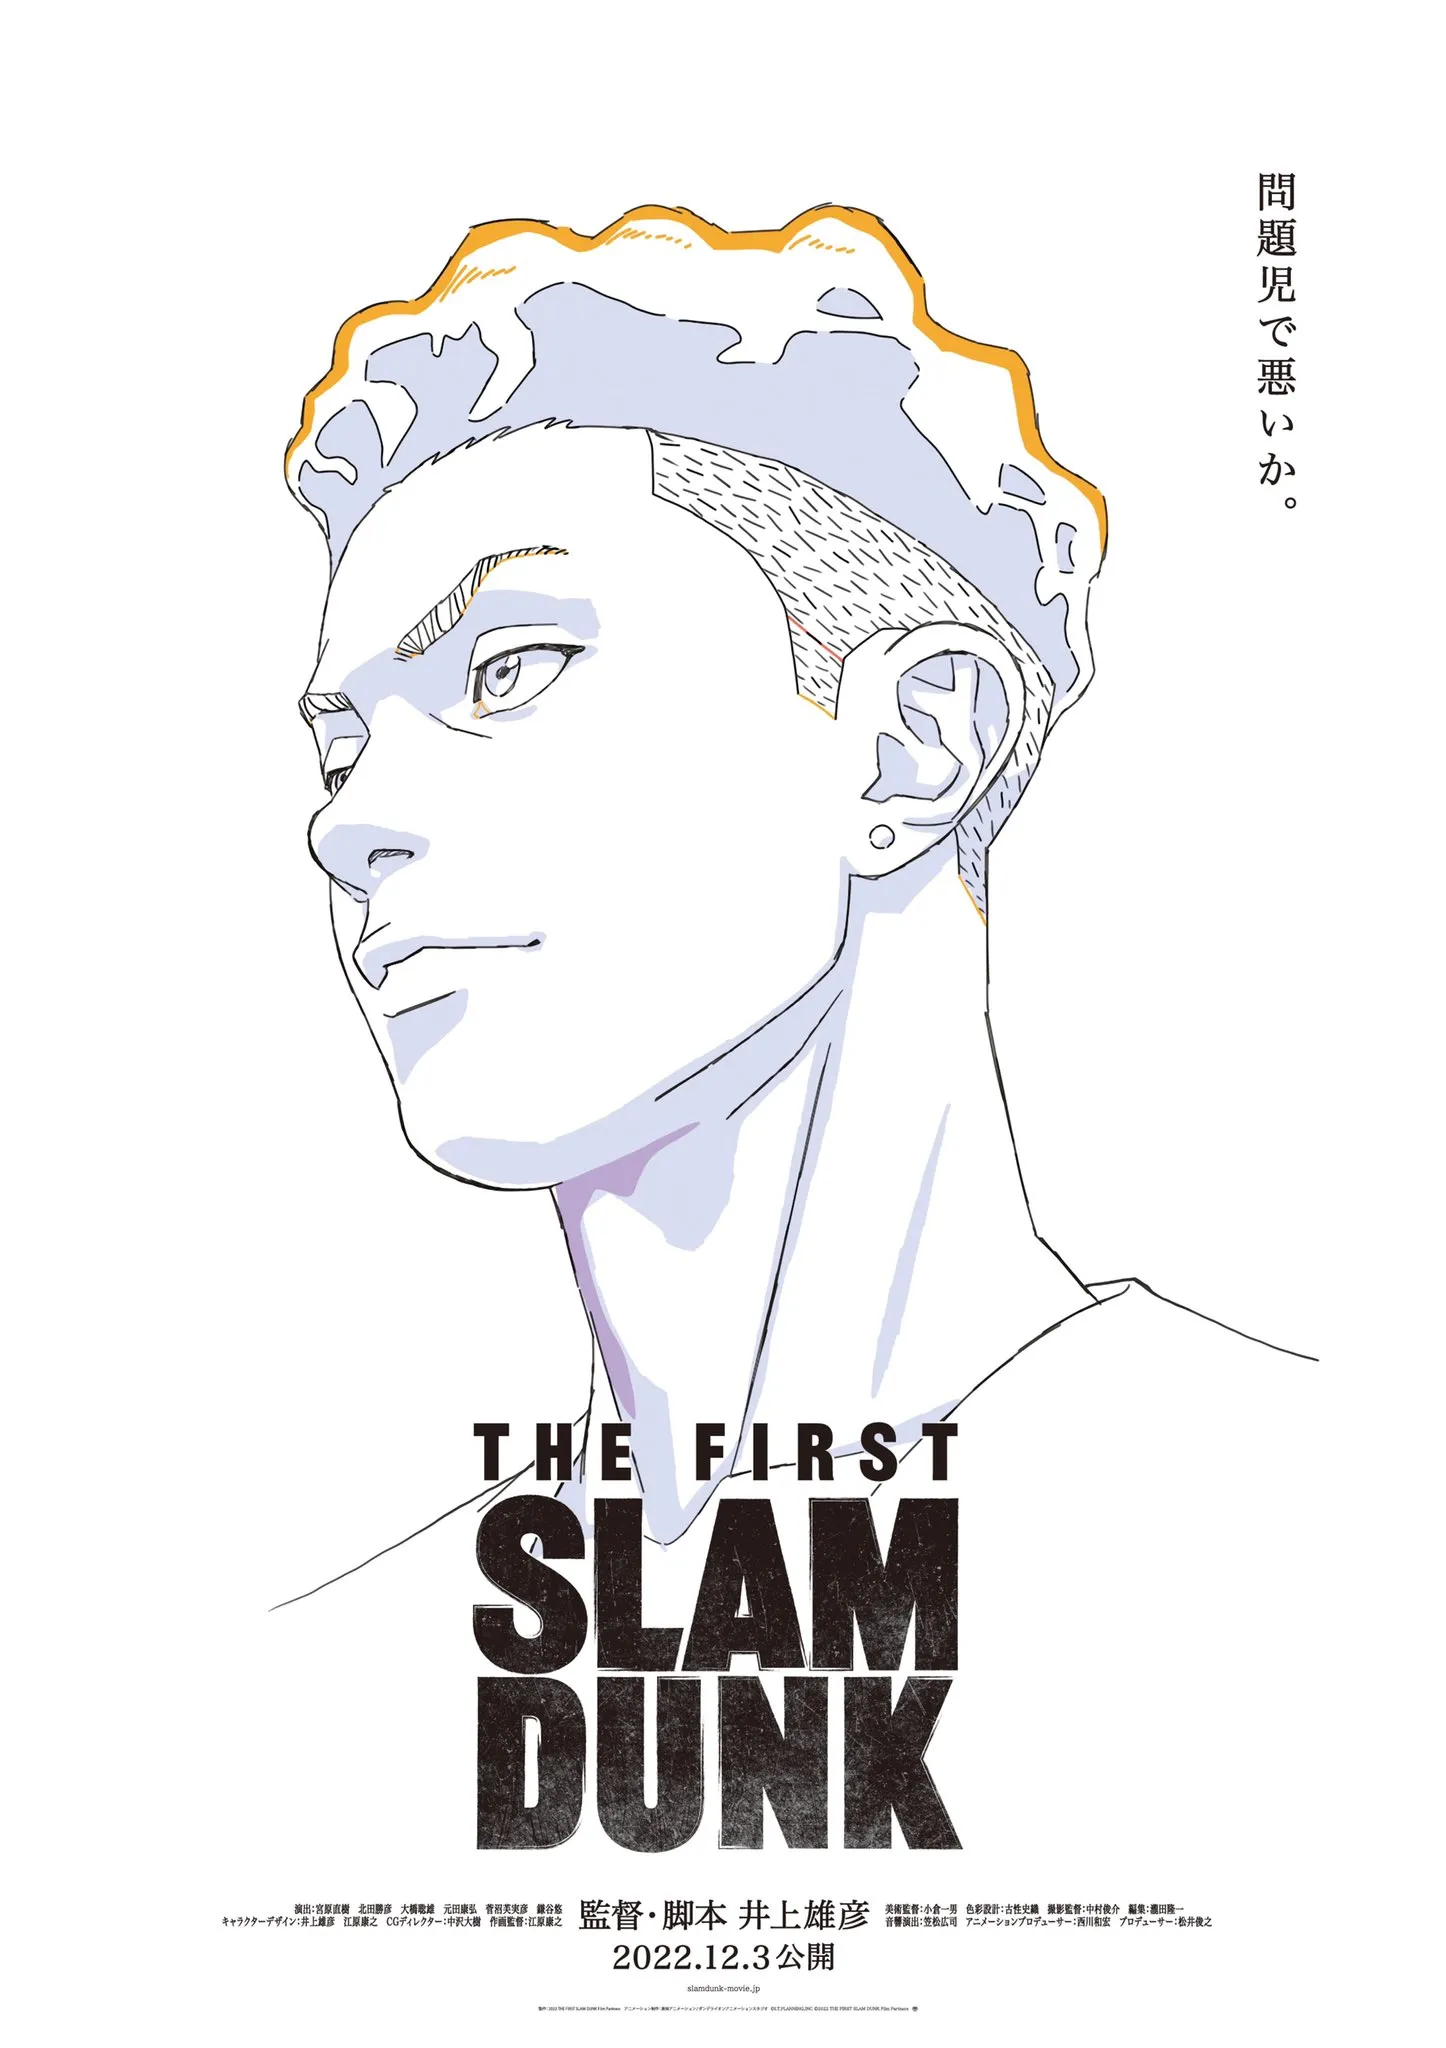 Slam Dunk returns with new 2022 anime movie helmed by creator